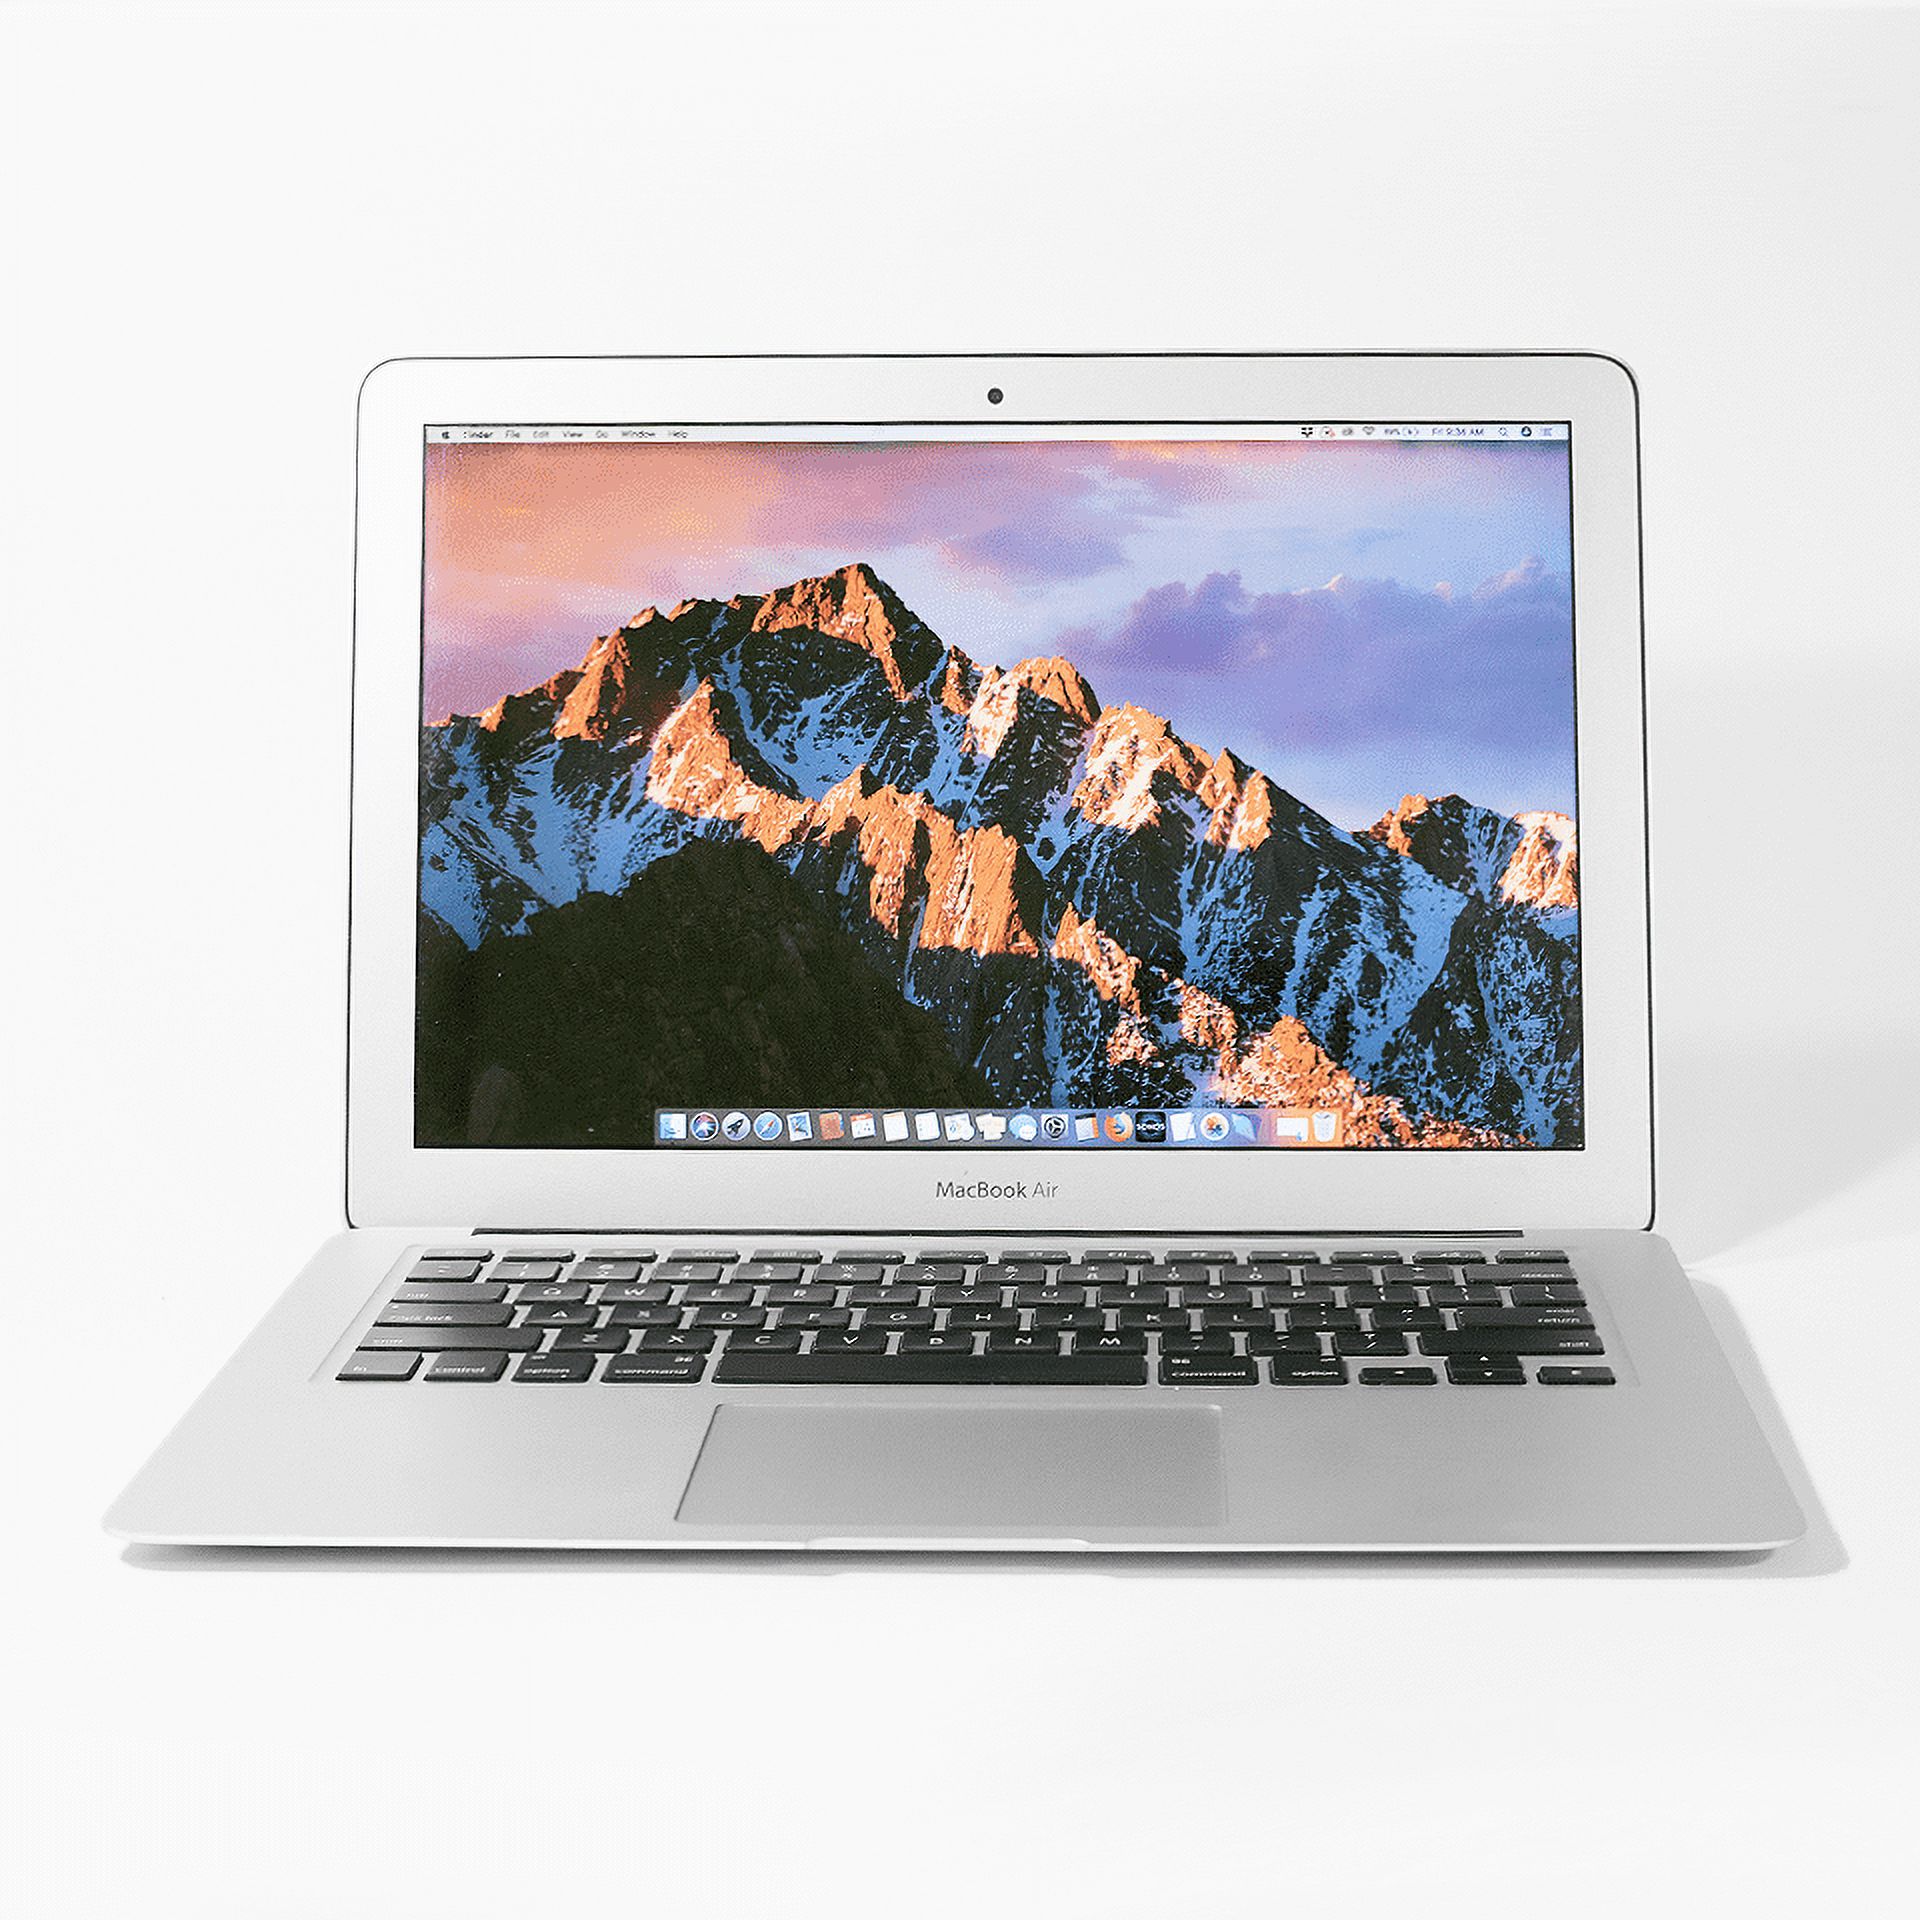 Used 13" Apple MacBook Air 1.7GHz Dual Core i7 8GB Memory / 256GB SSD (Turbo Boost to 3.3GHz) () - image 3 of 7